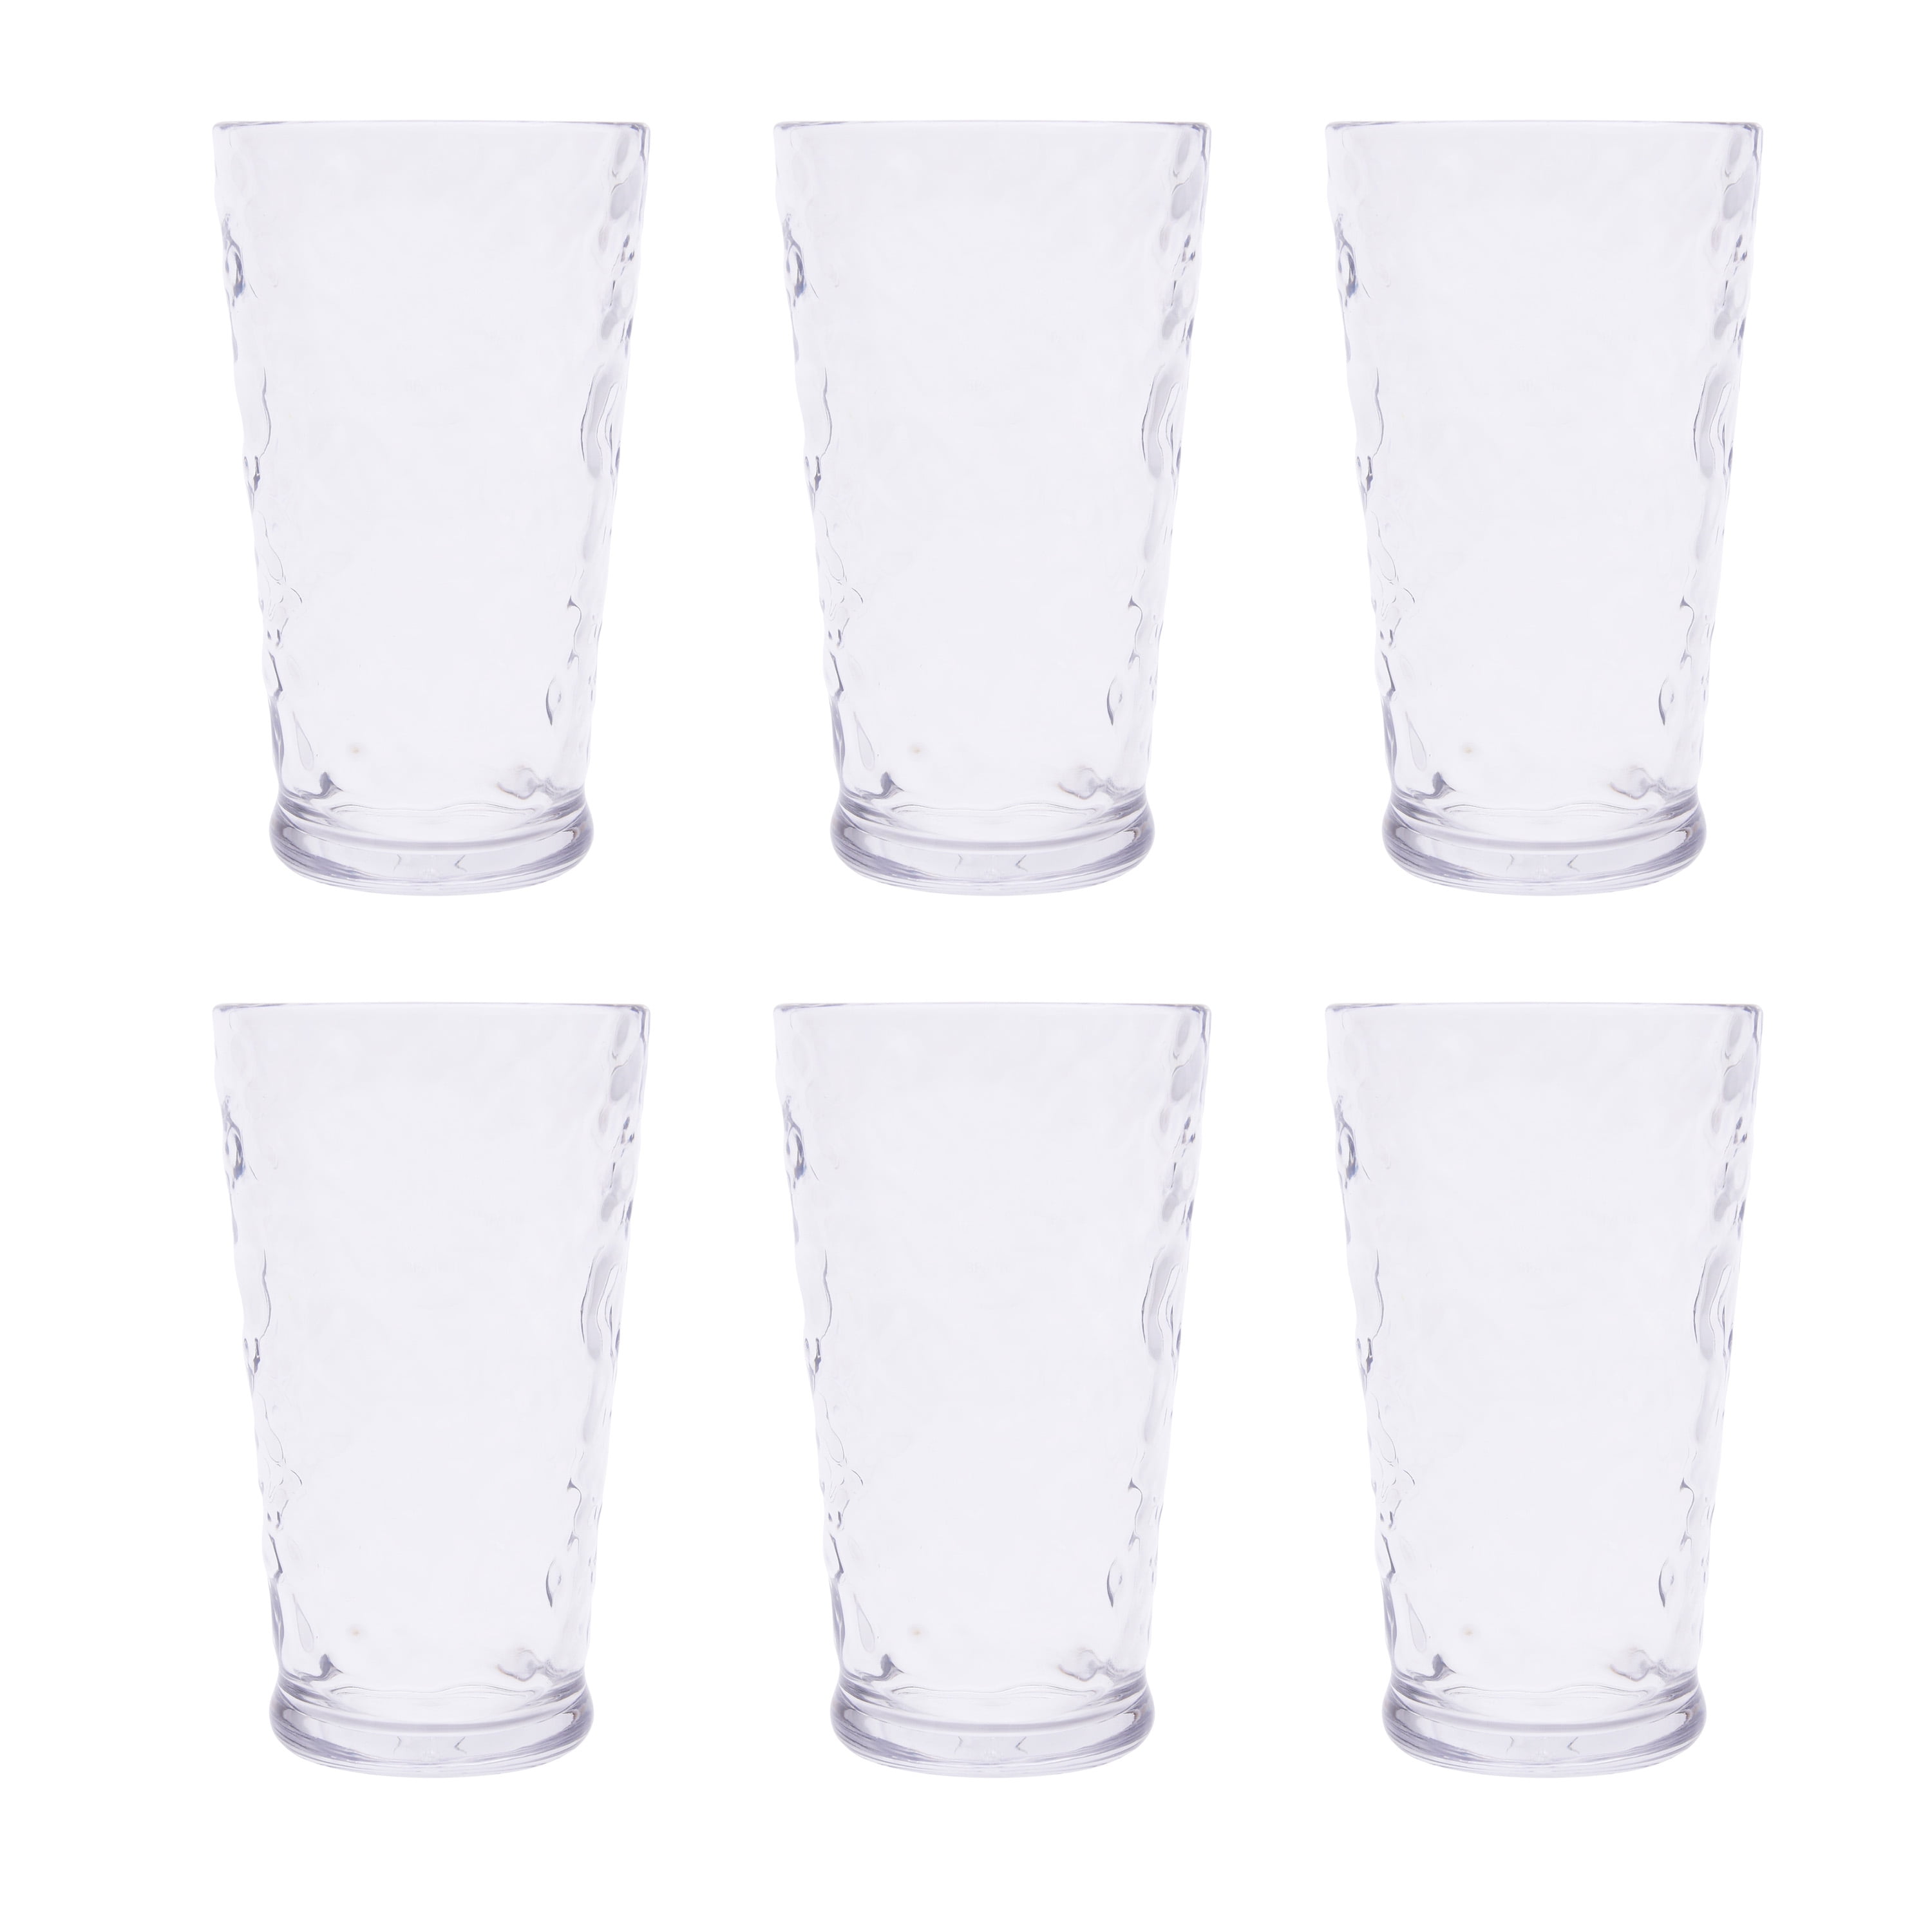 Tritan Highball and DOF Tumbler Set, 12 Pack (Assorted Colors) by Tritan 